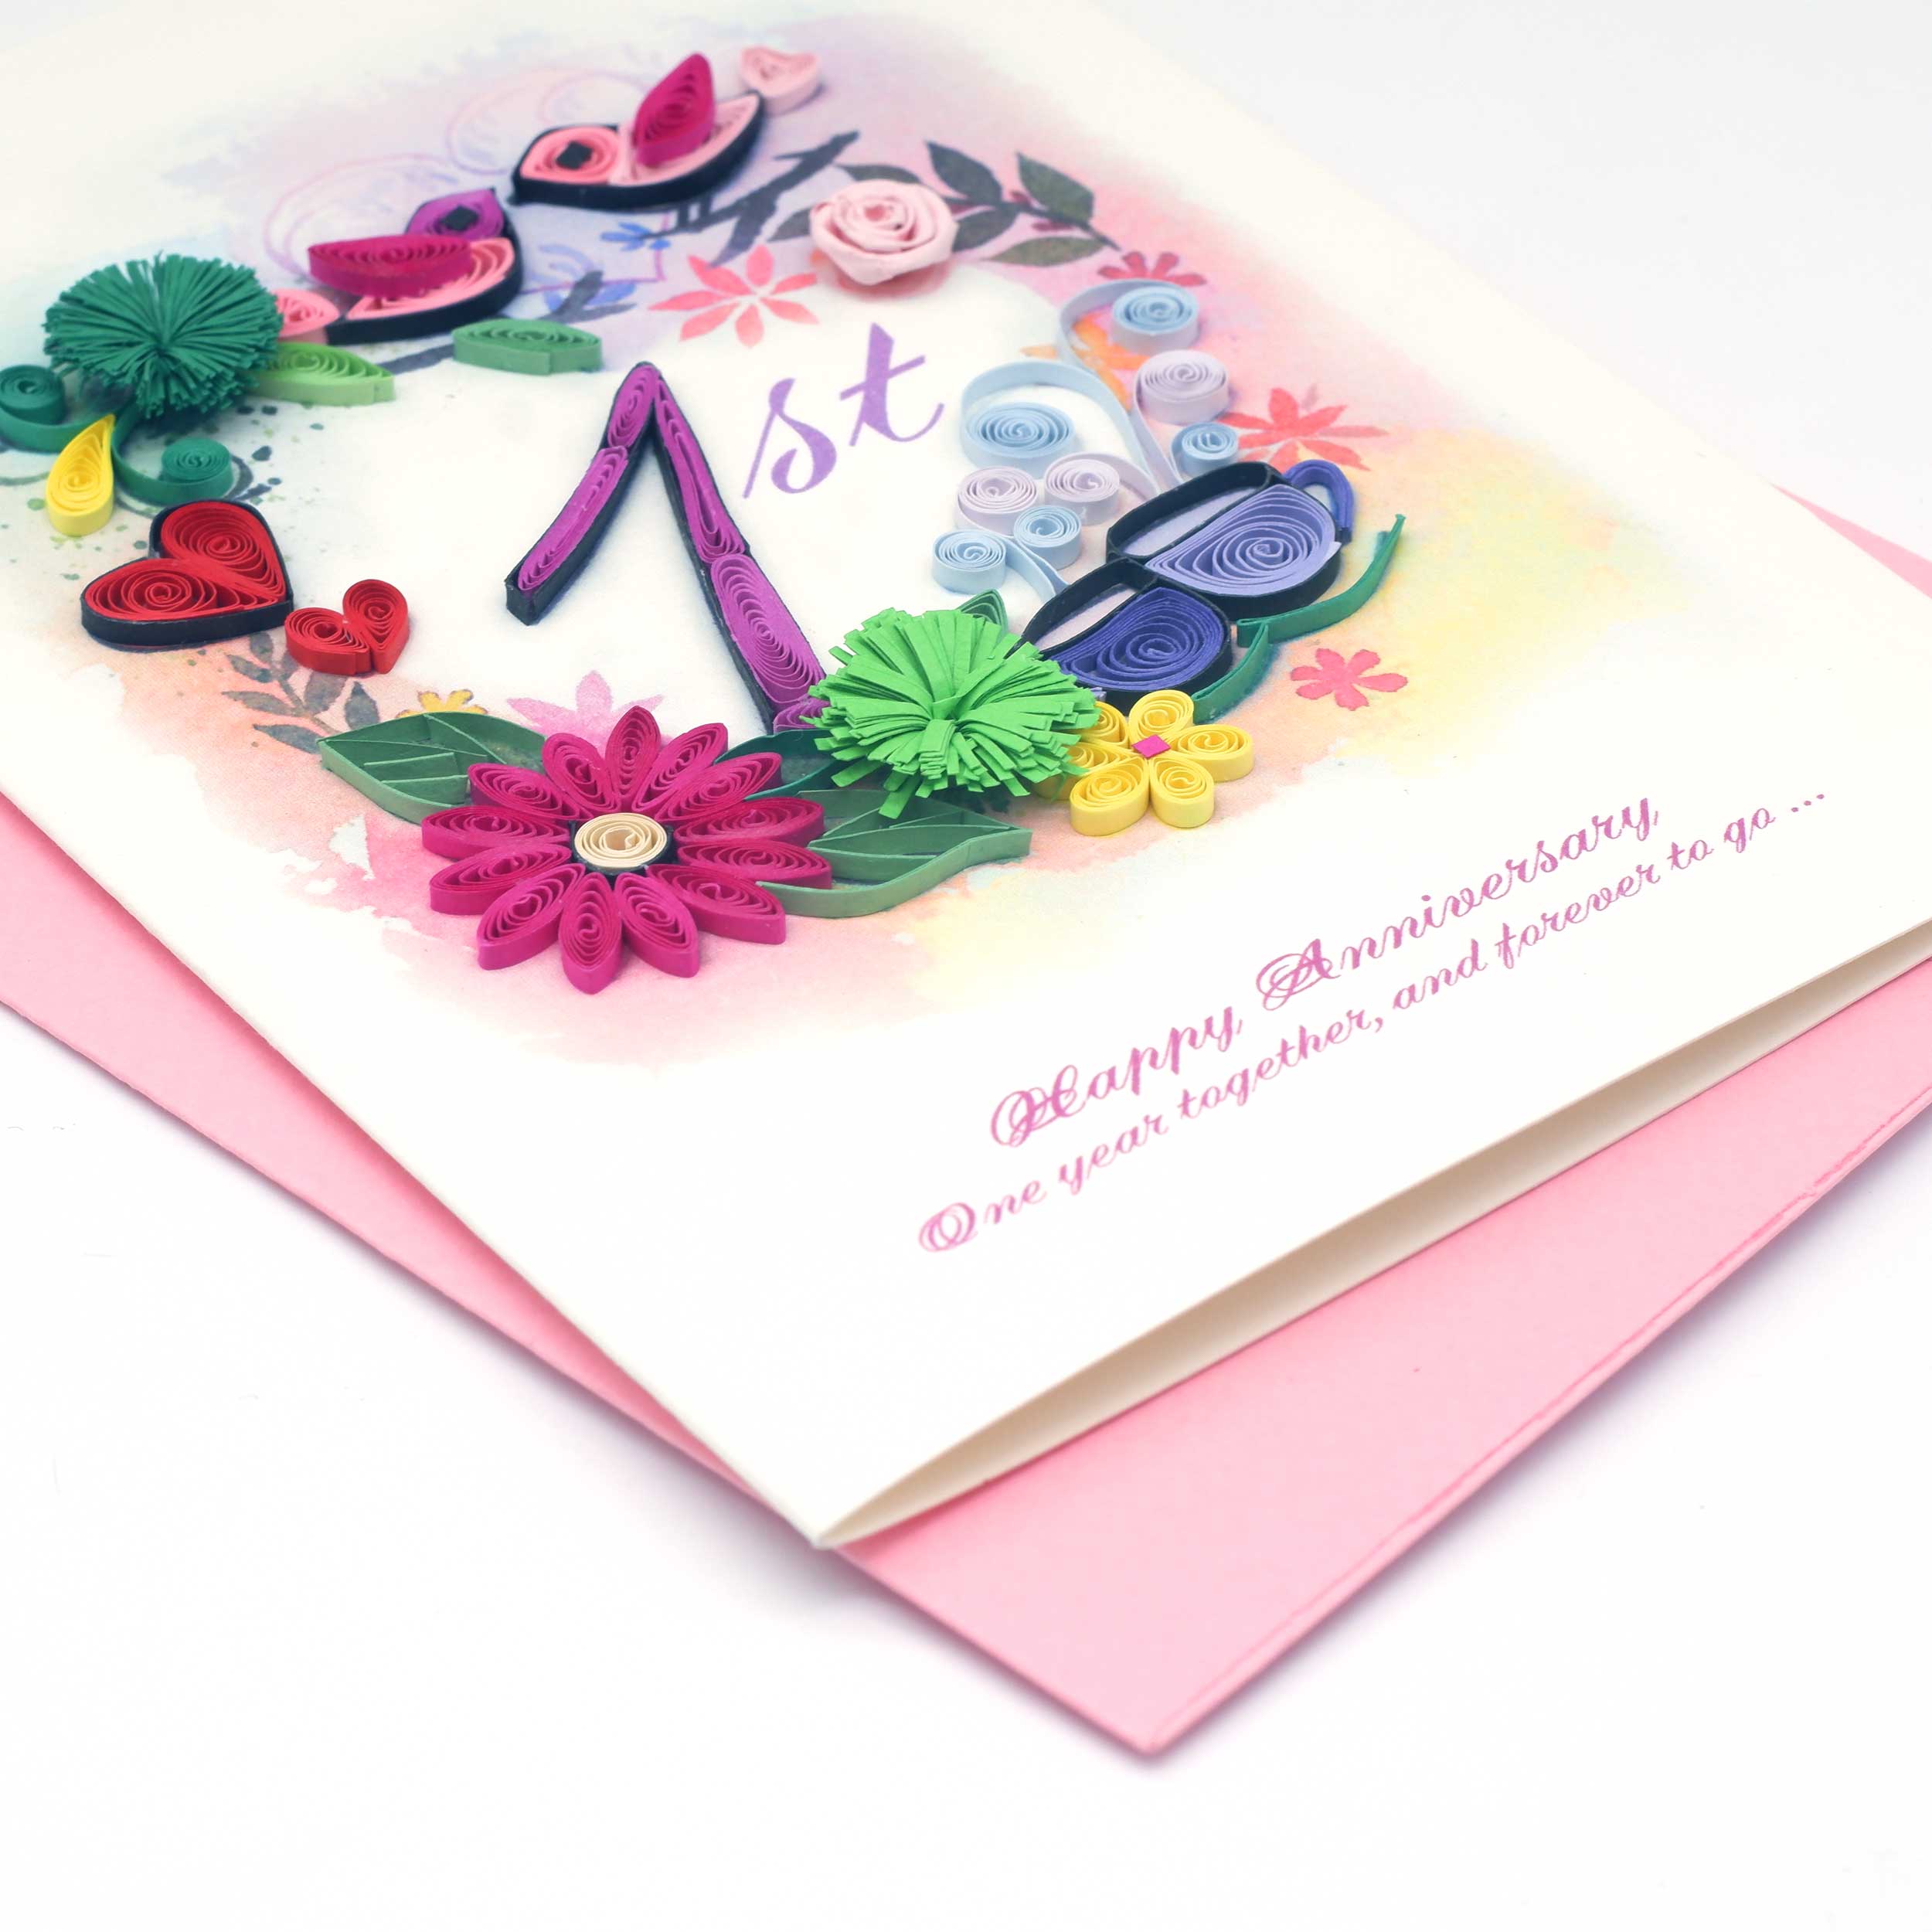 QUILLING 1ST ANNIVERSARY GREETING CARD